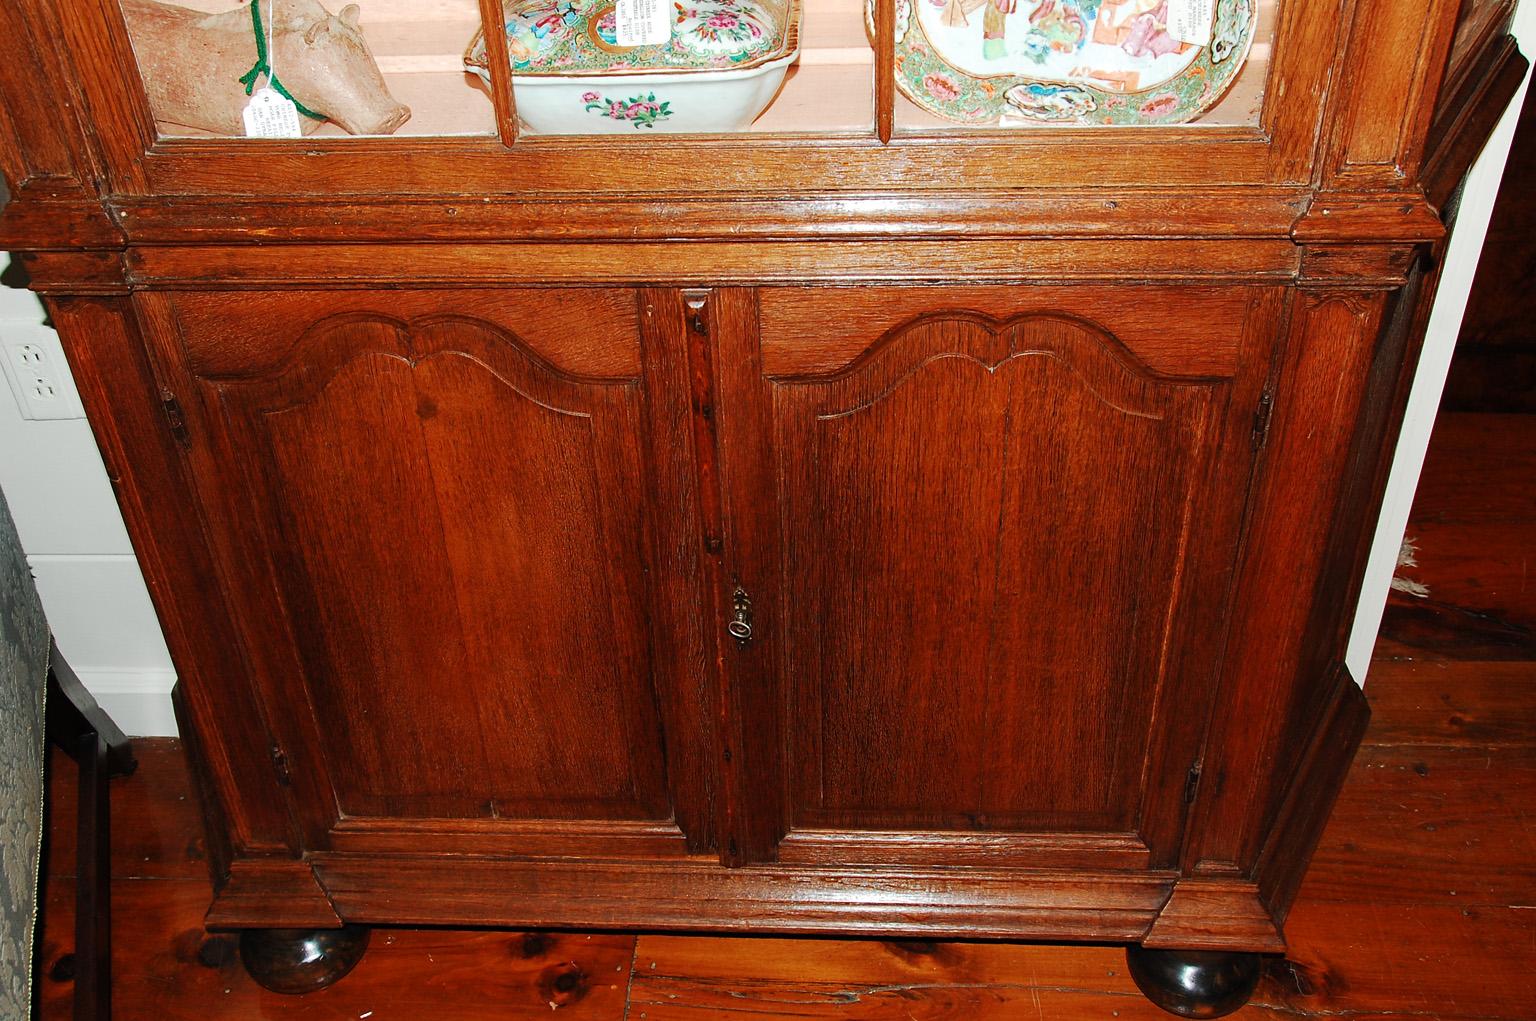 Dutch 18th Century Glazed Top Display Cabinet with Shelves above, Cabinet below In Good Condition For Sale In Wells, ME